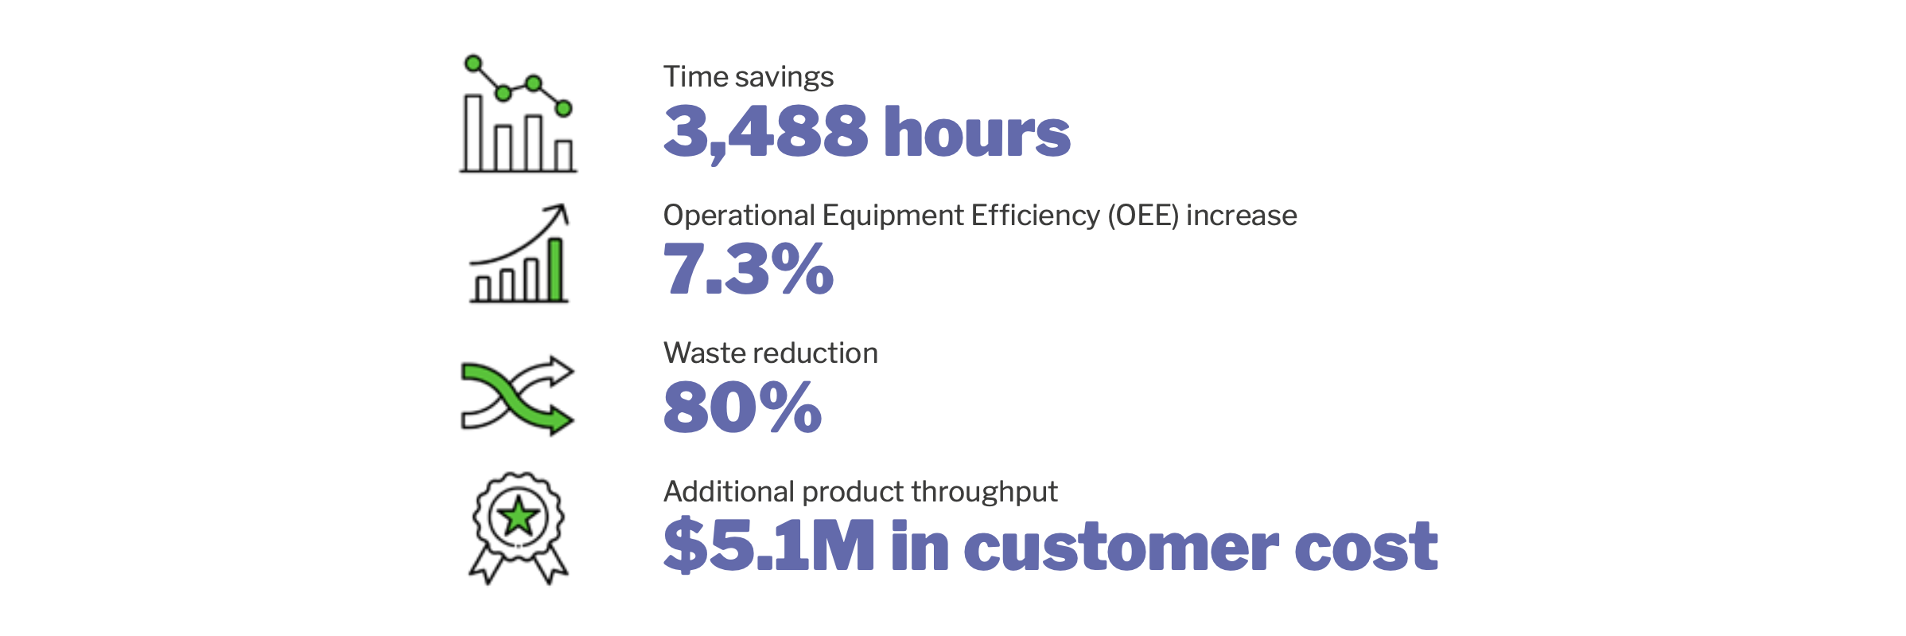 Time savings 3488 hours, operational equipment efficiency increase 7.3%, waste reduction 80%, additional product throughput $5.1M